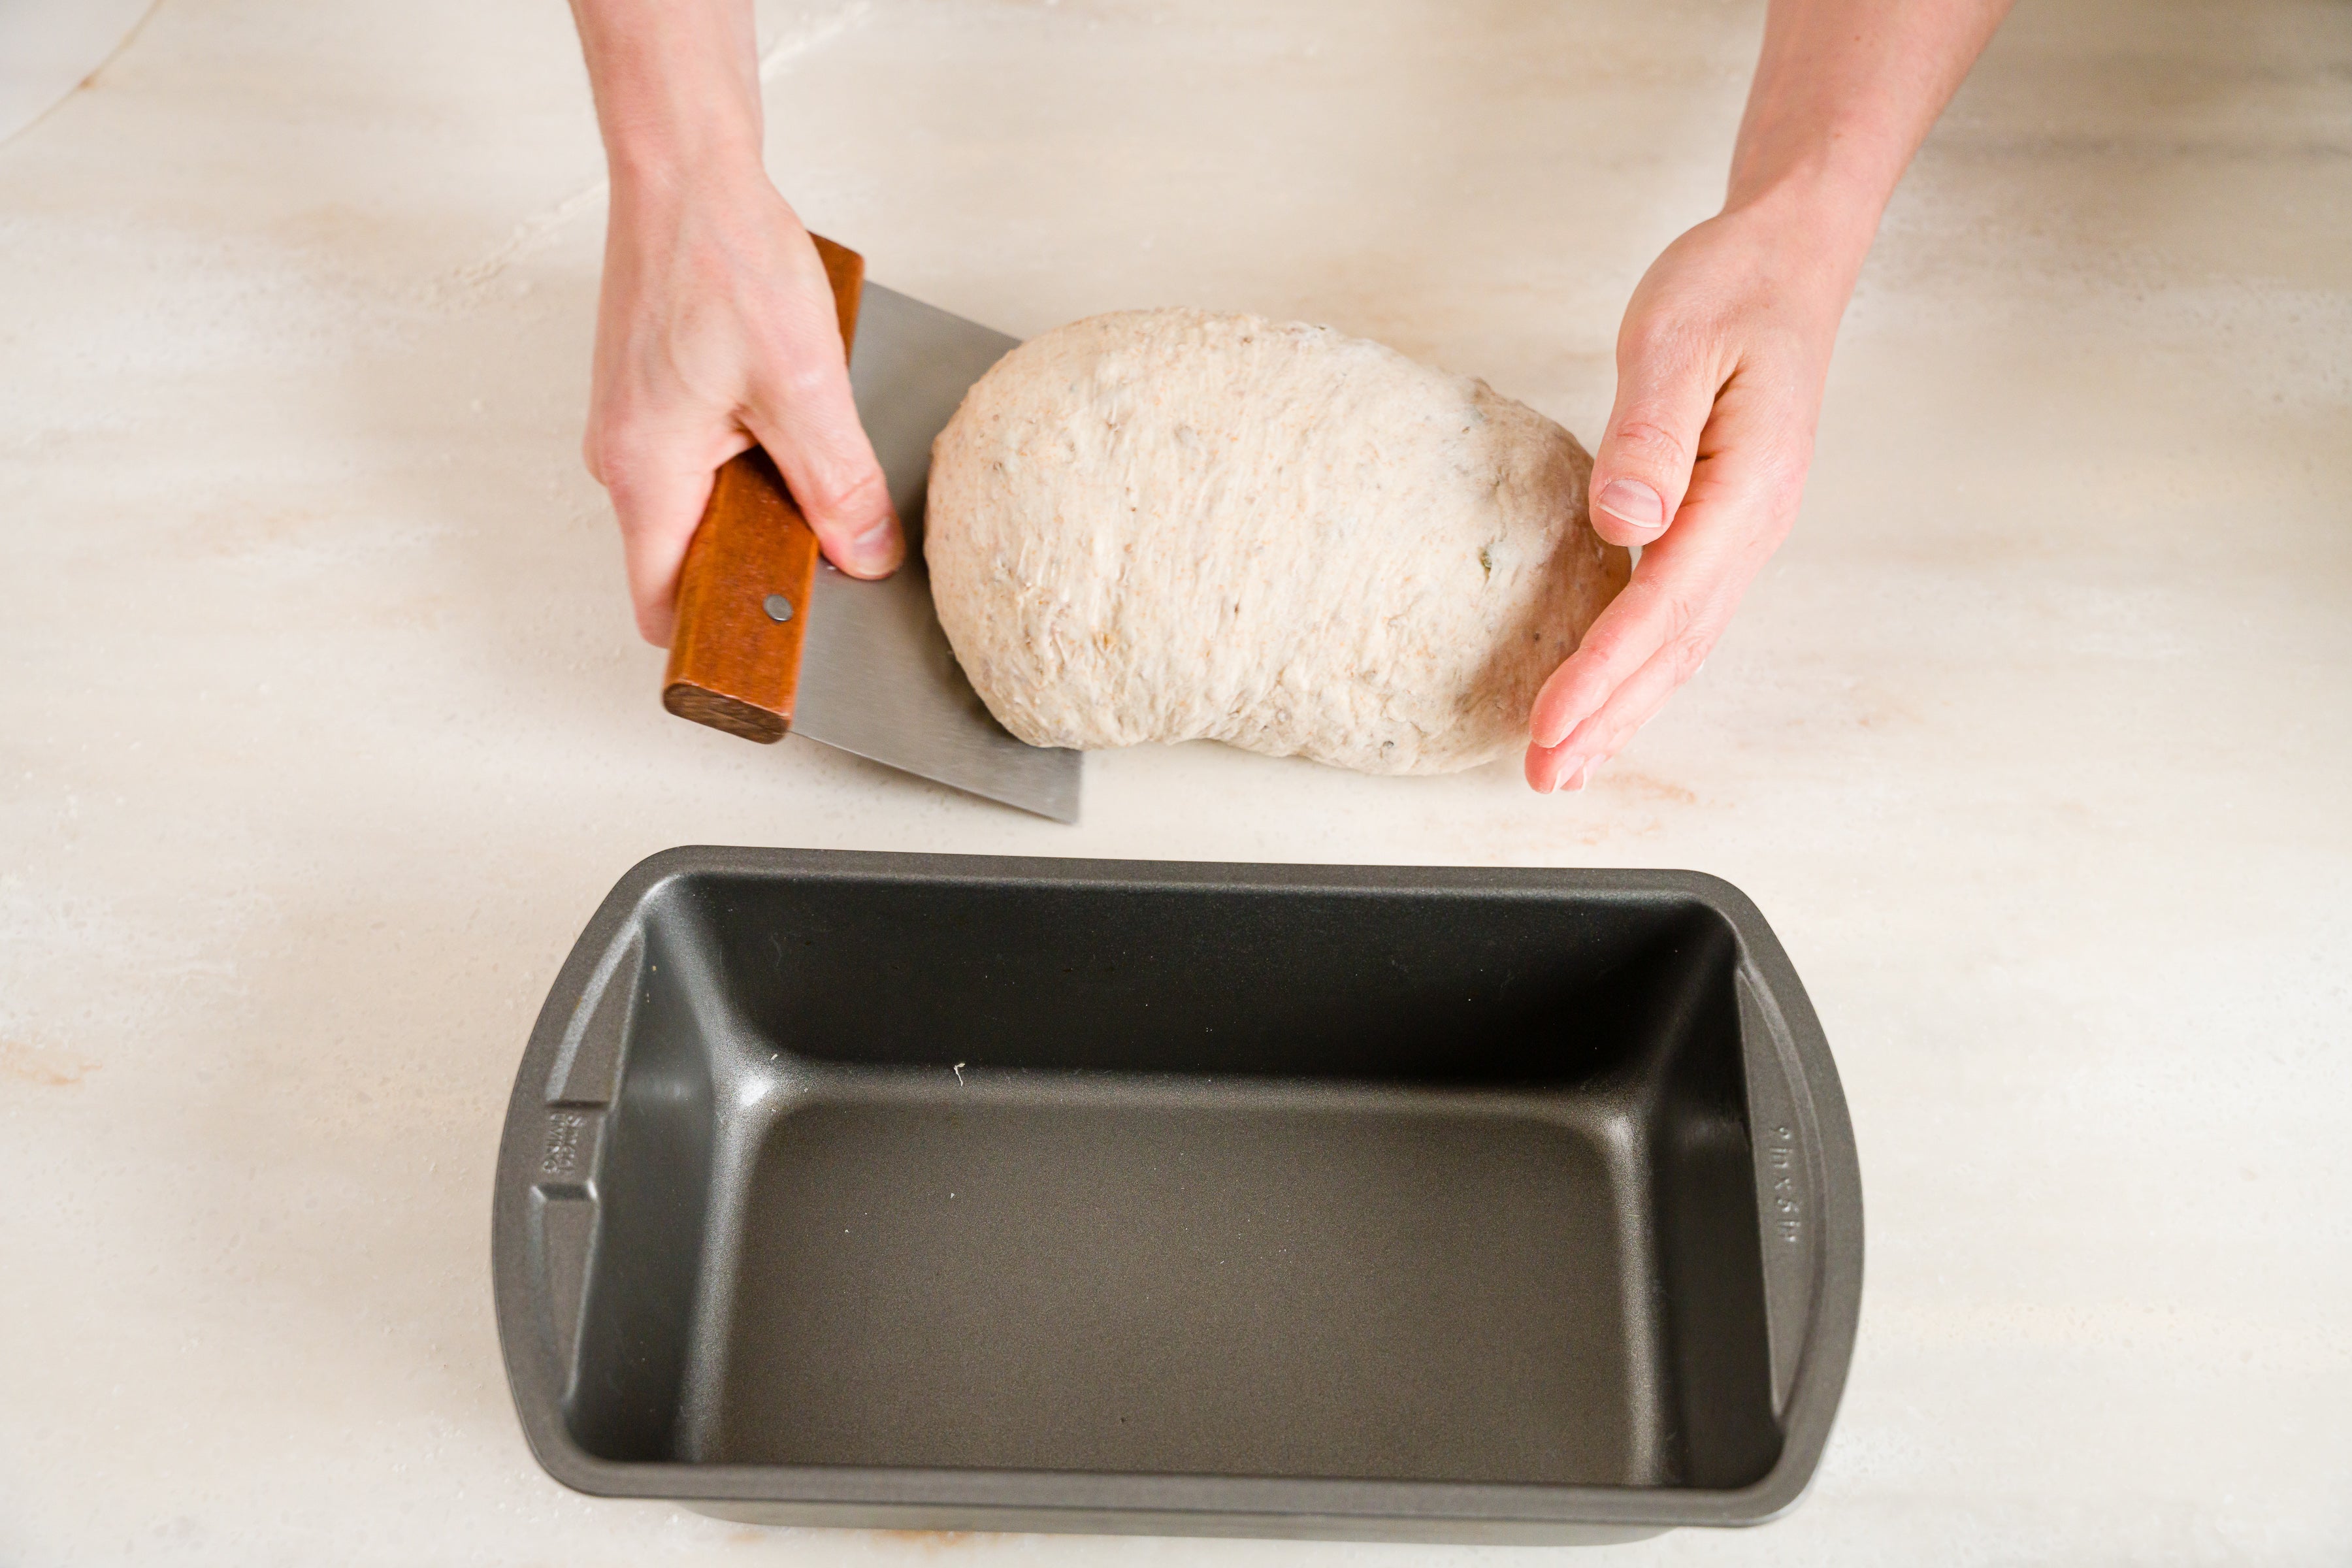 woman's hands lifting shaped loaf into bread pan